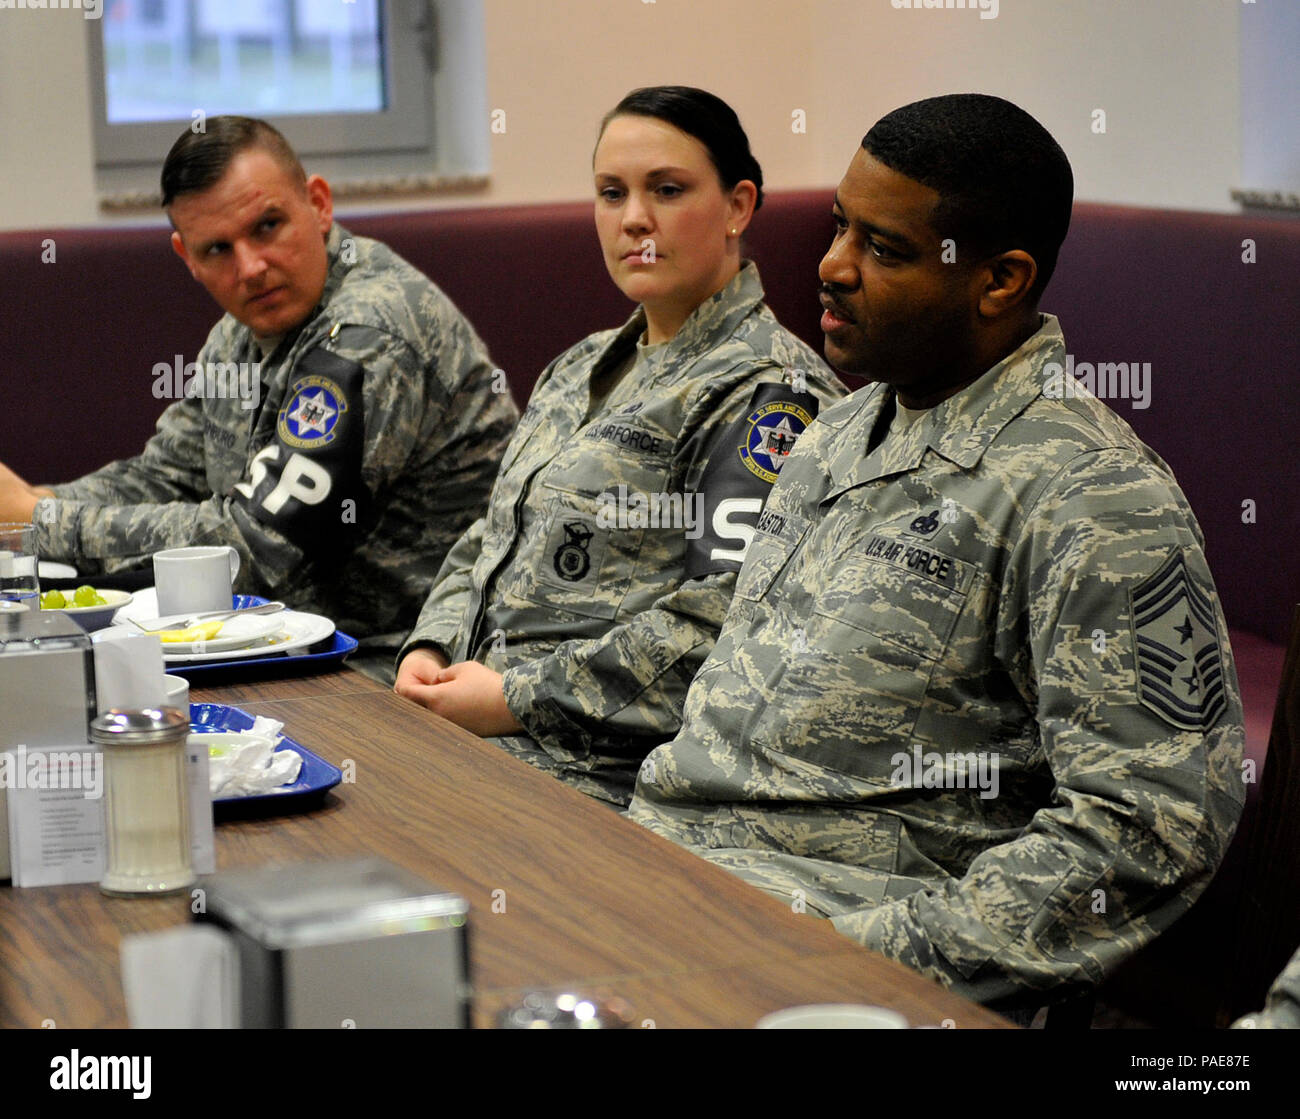 Chief Master Sgt. Phillip L. Easton (right), 86th Airlift Wing command chief, talks with Airmen during an enlisted breakfast March 11, 2016, at Kapaun Air Station, Germany. Easton spoke to the Airmen about his military service and answered questions they had about changes at Ramstein and across the Air Force. (U.S. Air Force photo/Airman 1st Class Larissa Greatwood) Stock Photo